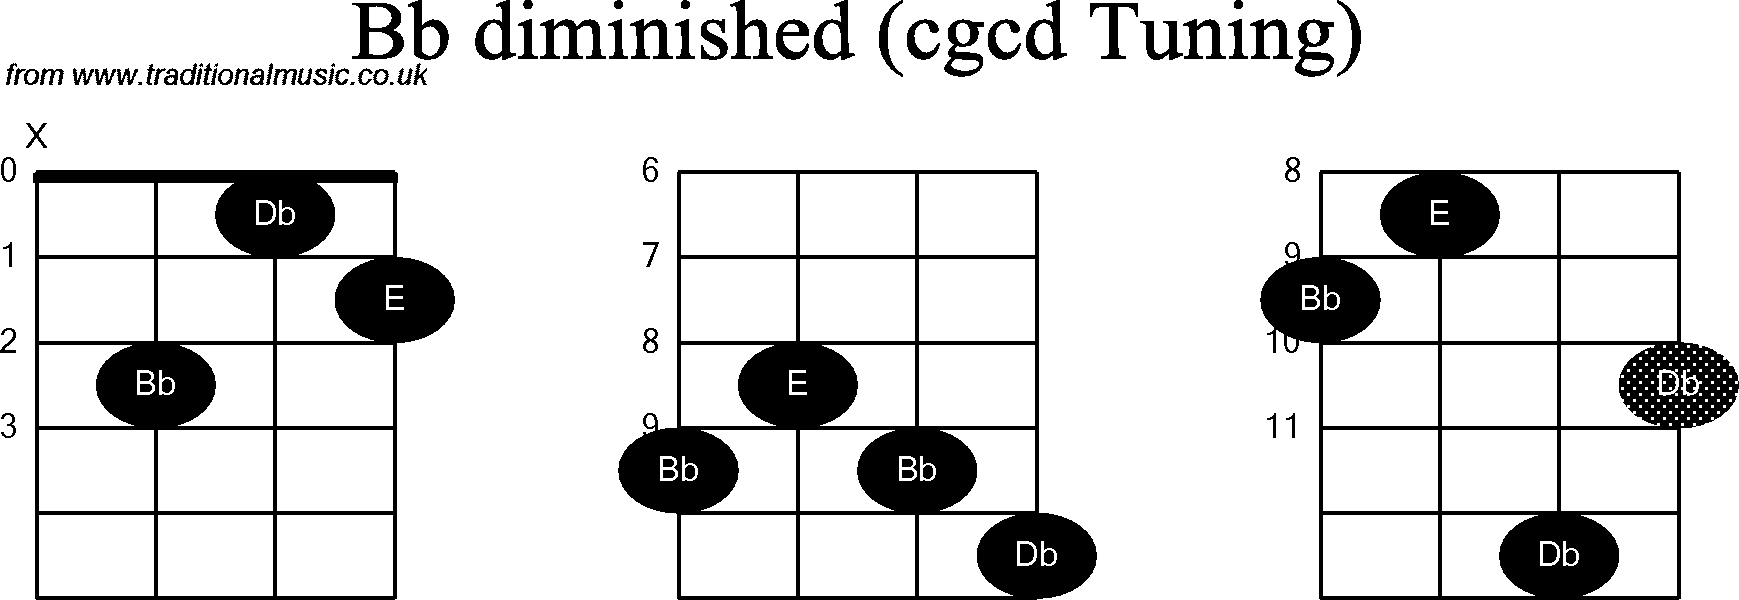 Chord diagrams for Banjo(Double C) Bb Diminished